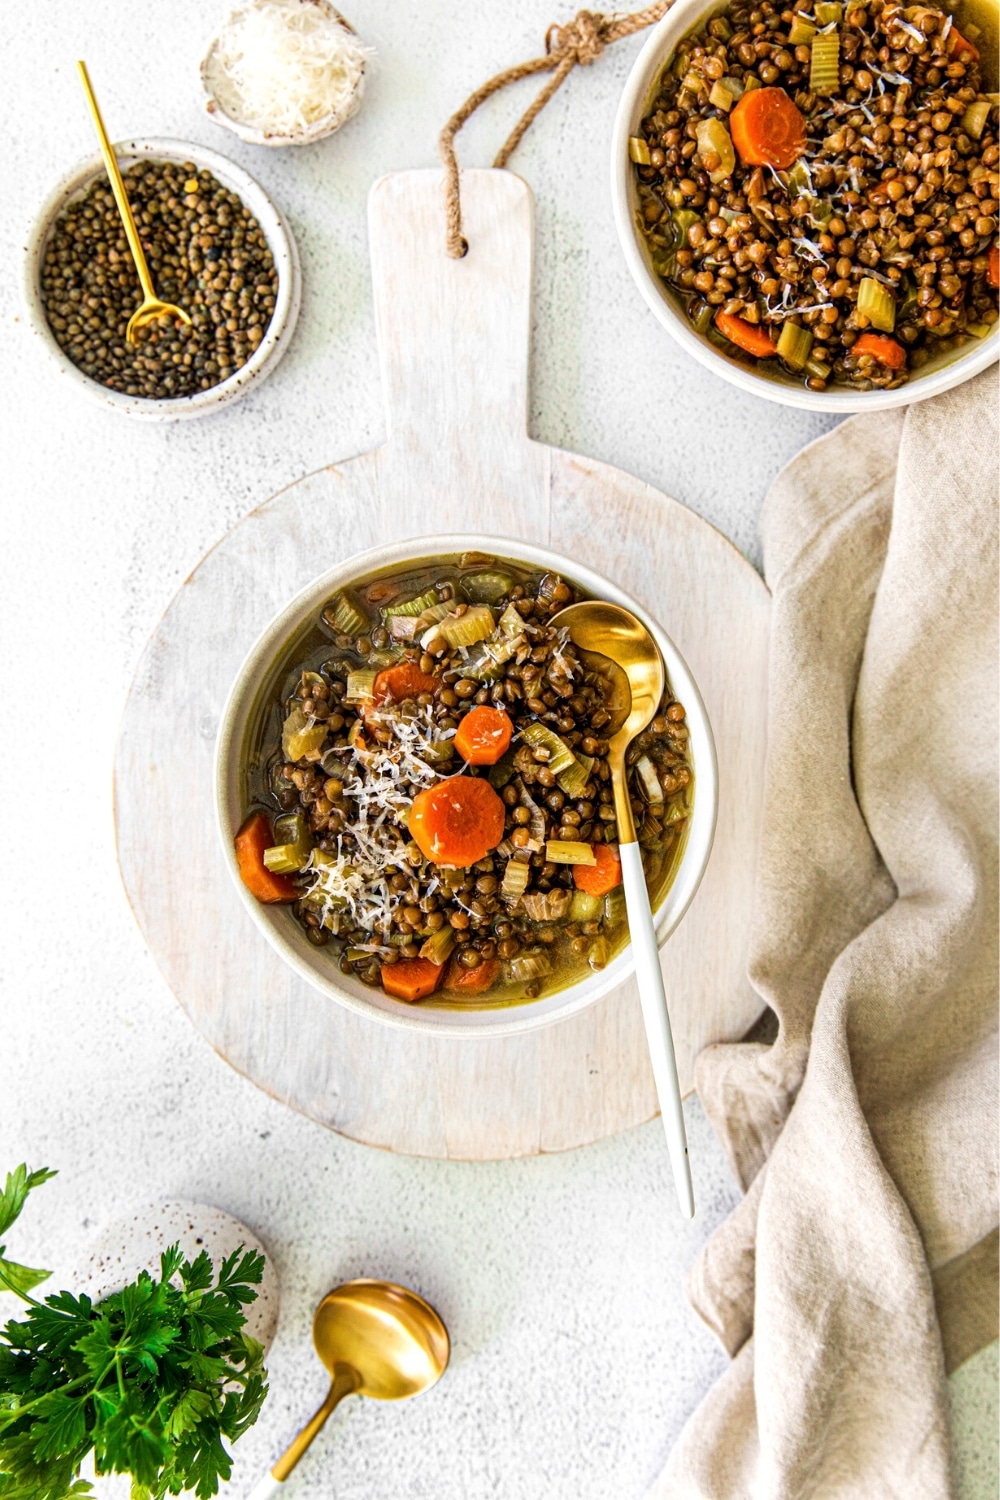 Green lentil soup on a serving table with Parmesan cheese and Italian parsley.